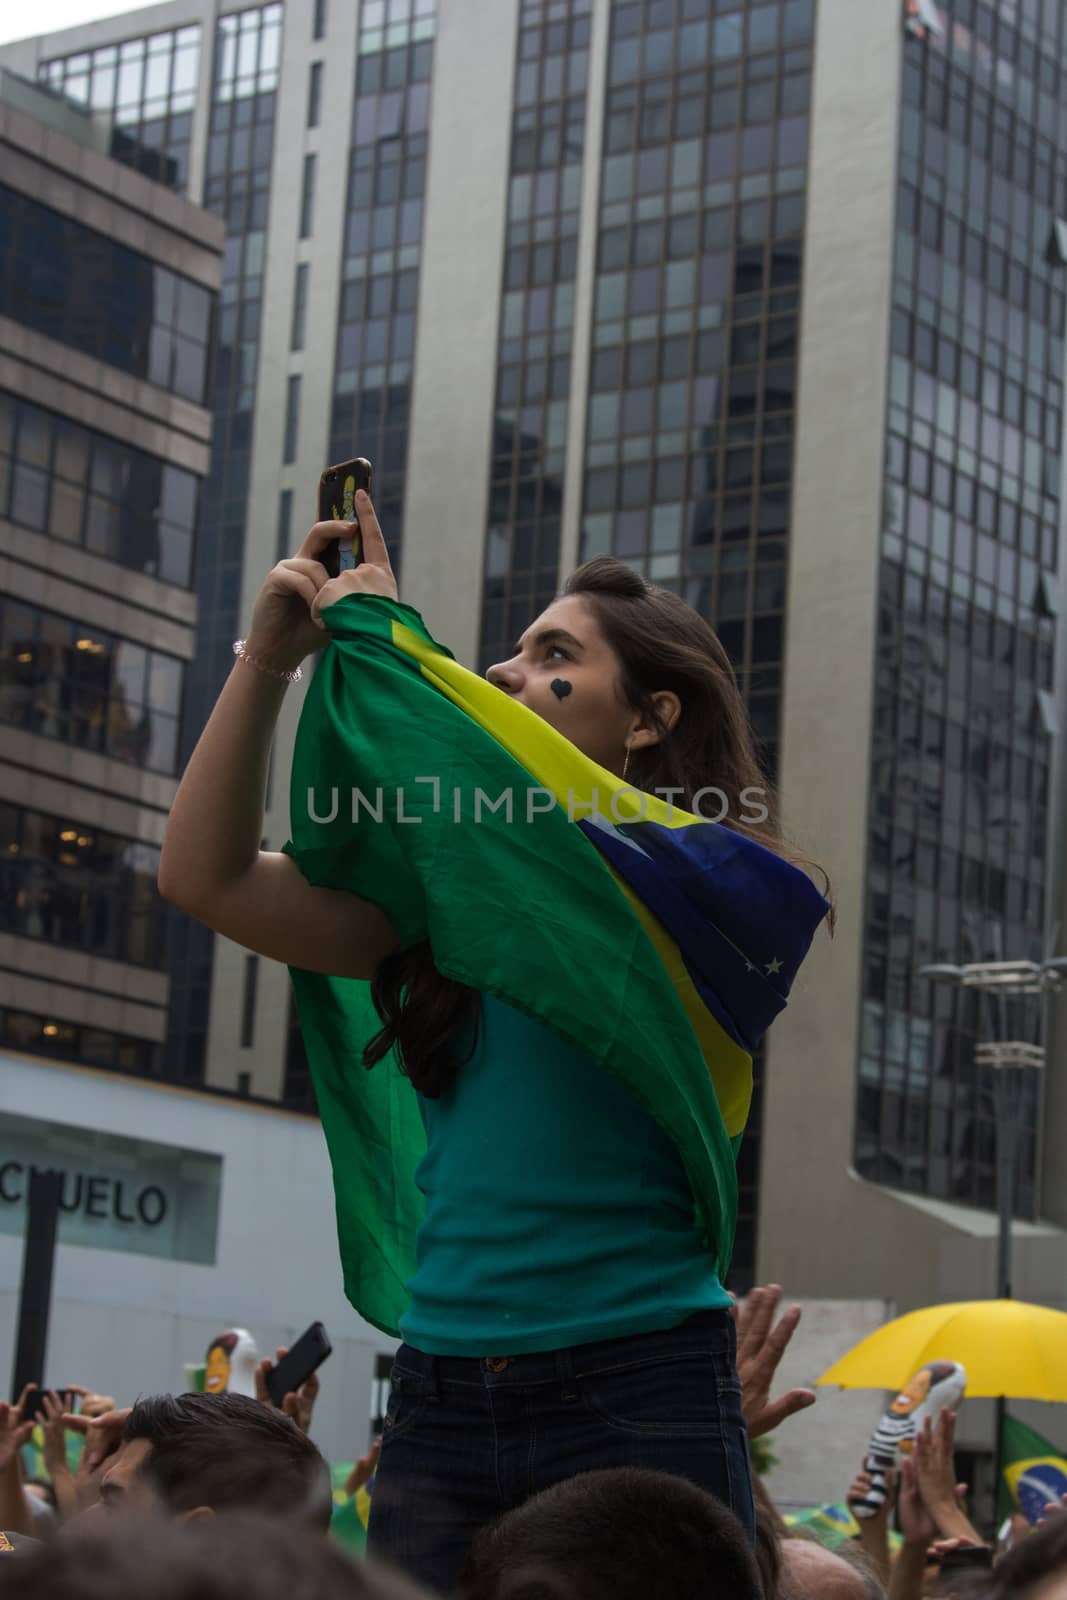 Sao Paulo Brazil March 13, 2016: One unidentified girl taking a selfie in the biggest protest against federal government corruption in Sao Paulo.